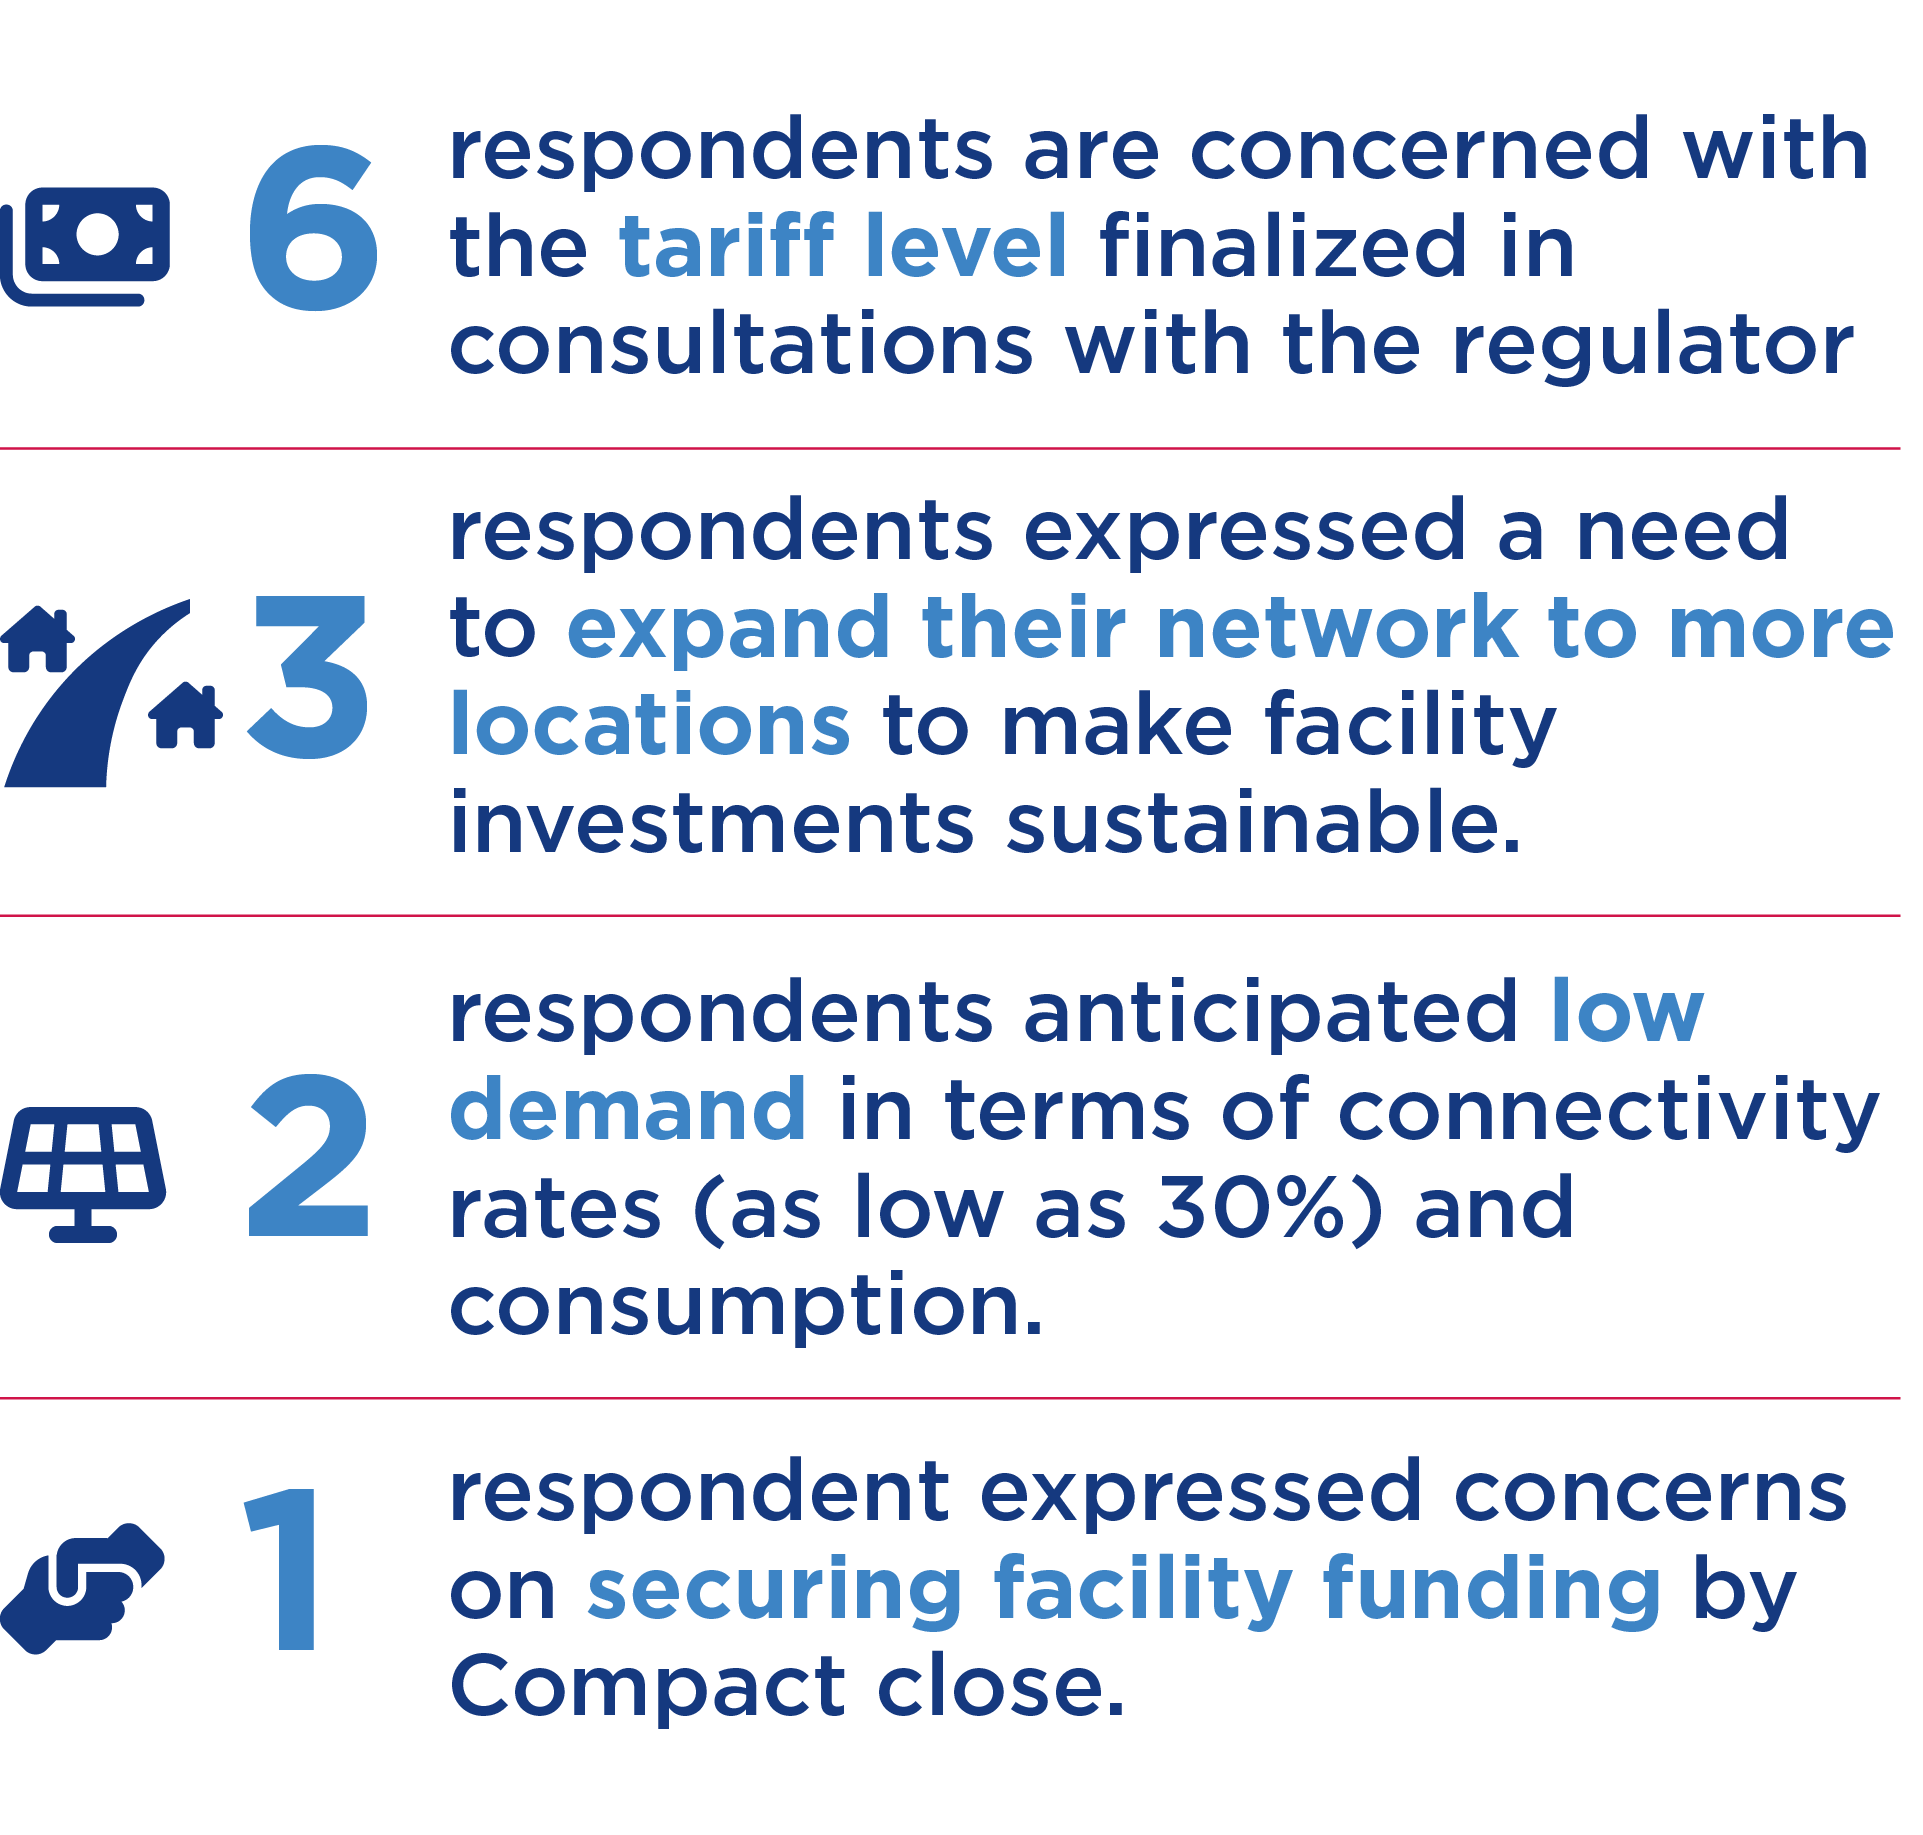 1 stakeholder expressed concerns on securing facility funding by Compact close.
2 stakeholders anticipated low demand in terms of connectivity rates (as low as 30%) and consumption.
3 stakeholders expressed a need to expand their network to more locations to make facility investments sustainable.
6 stakeholders are concerned with the tariff level finalized in consultations with the regulator